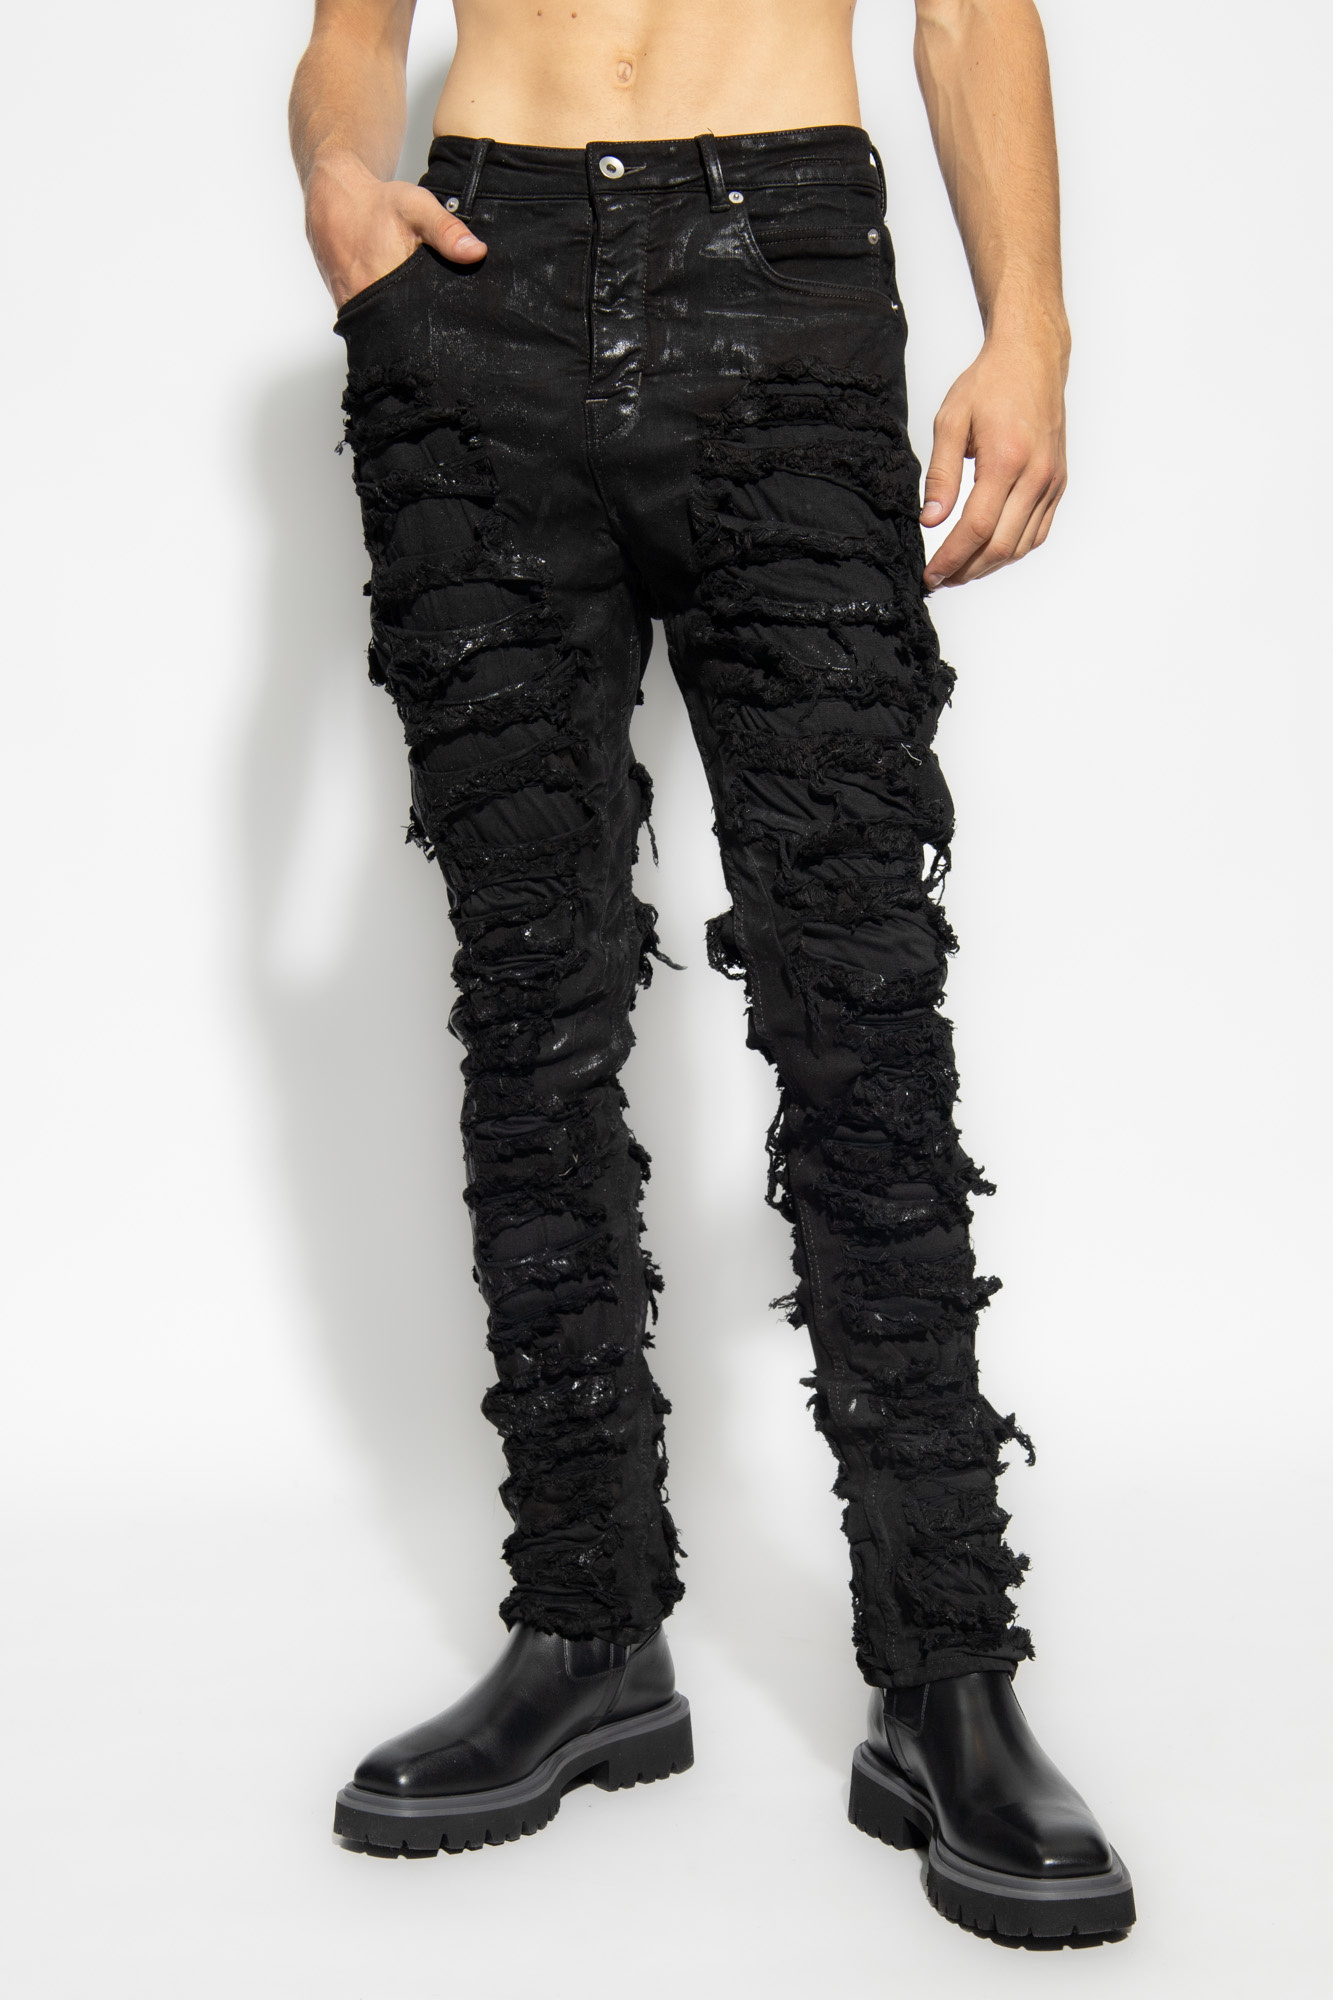 Pants with logo by Rick Owens Drkshdw